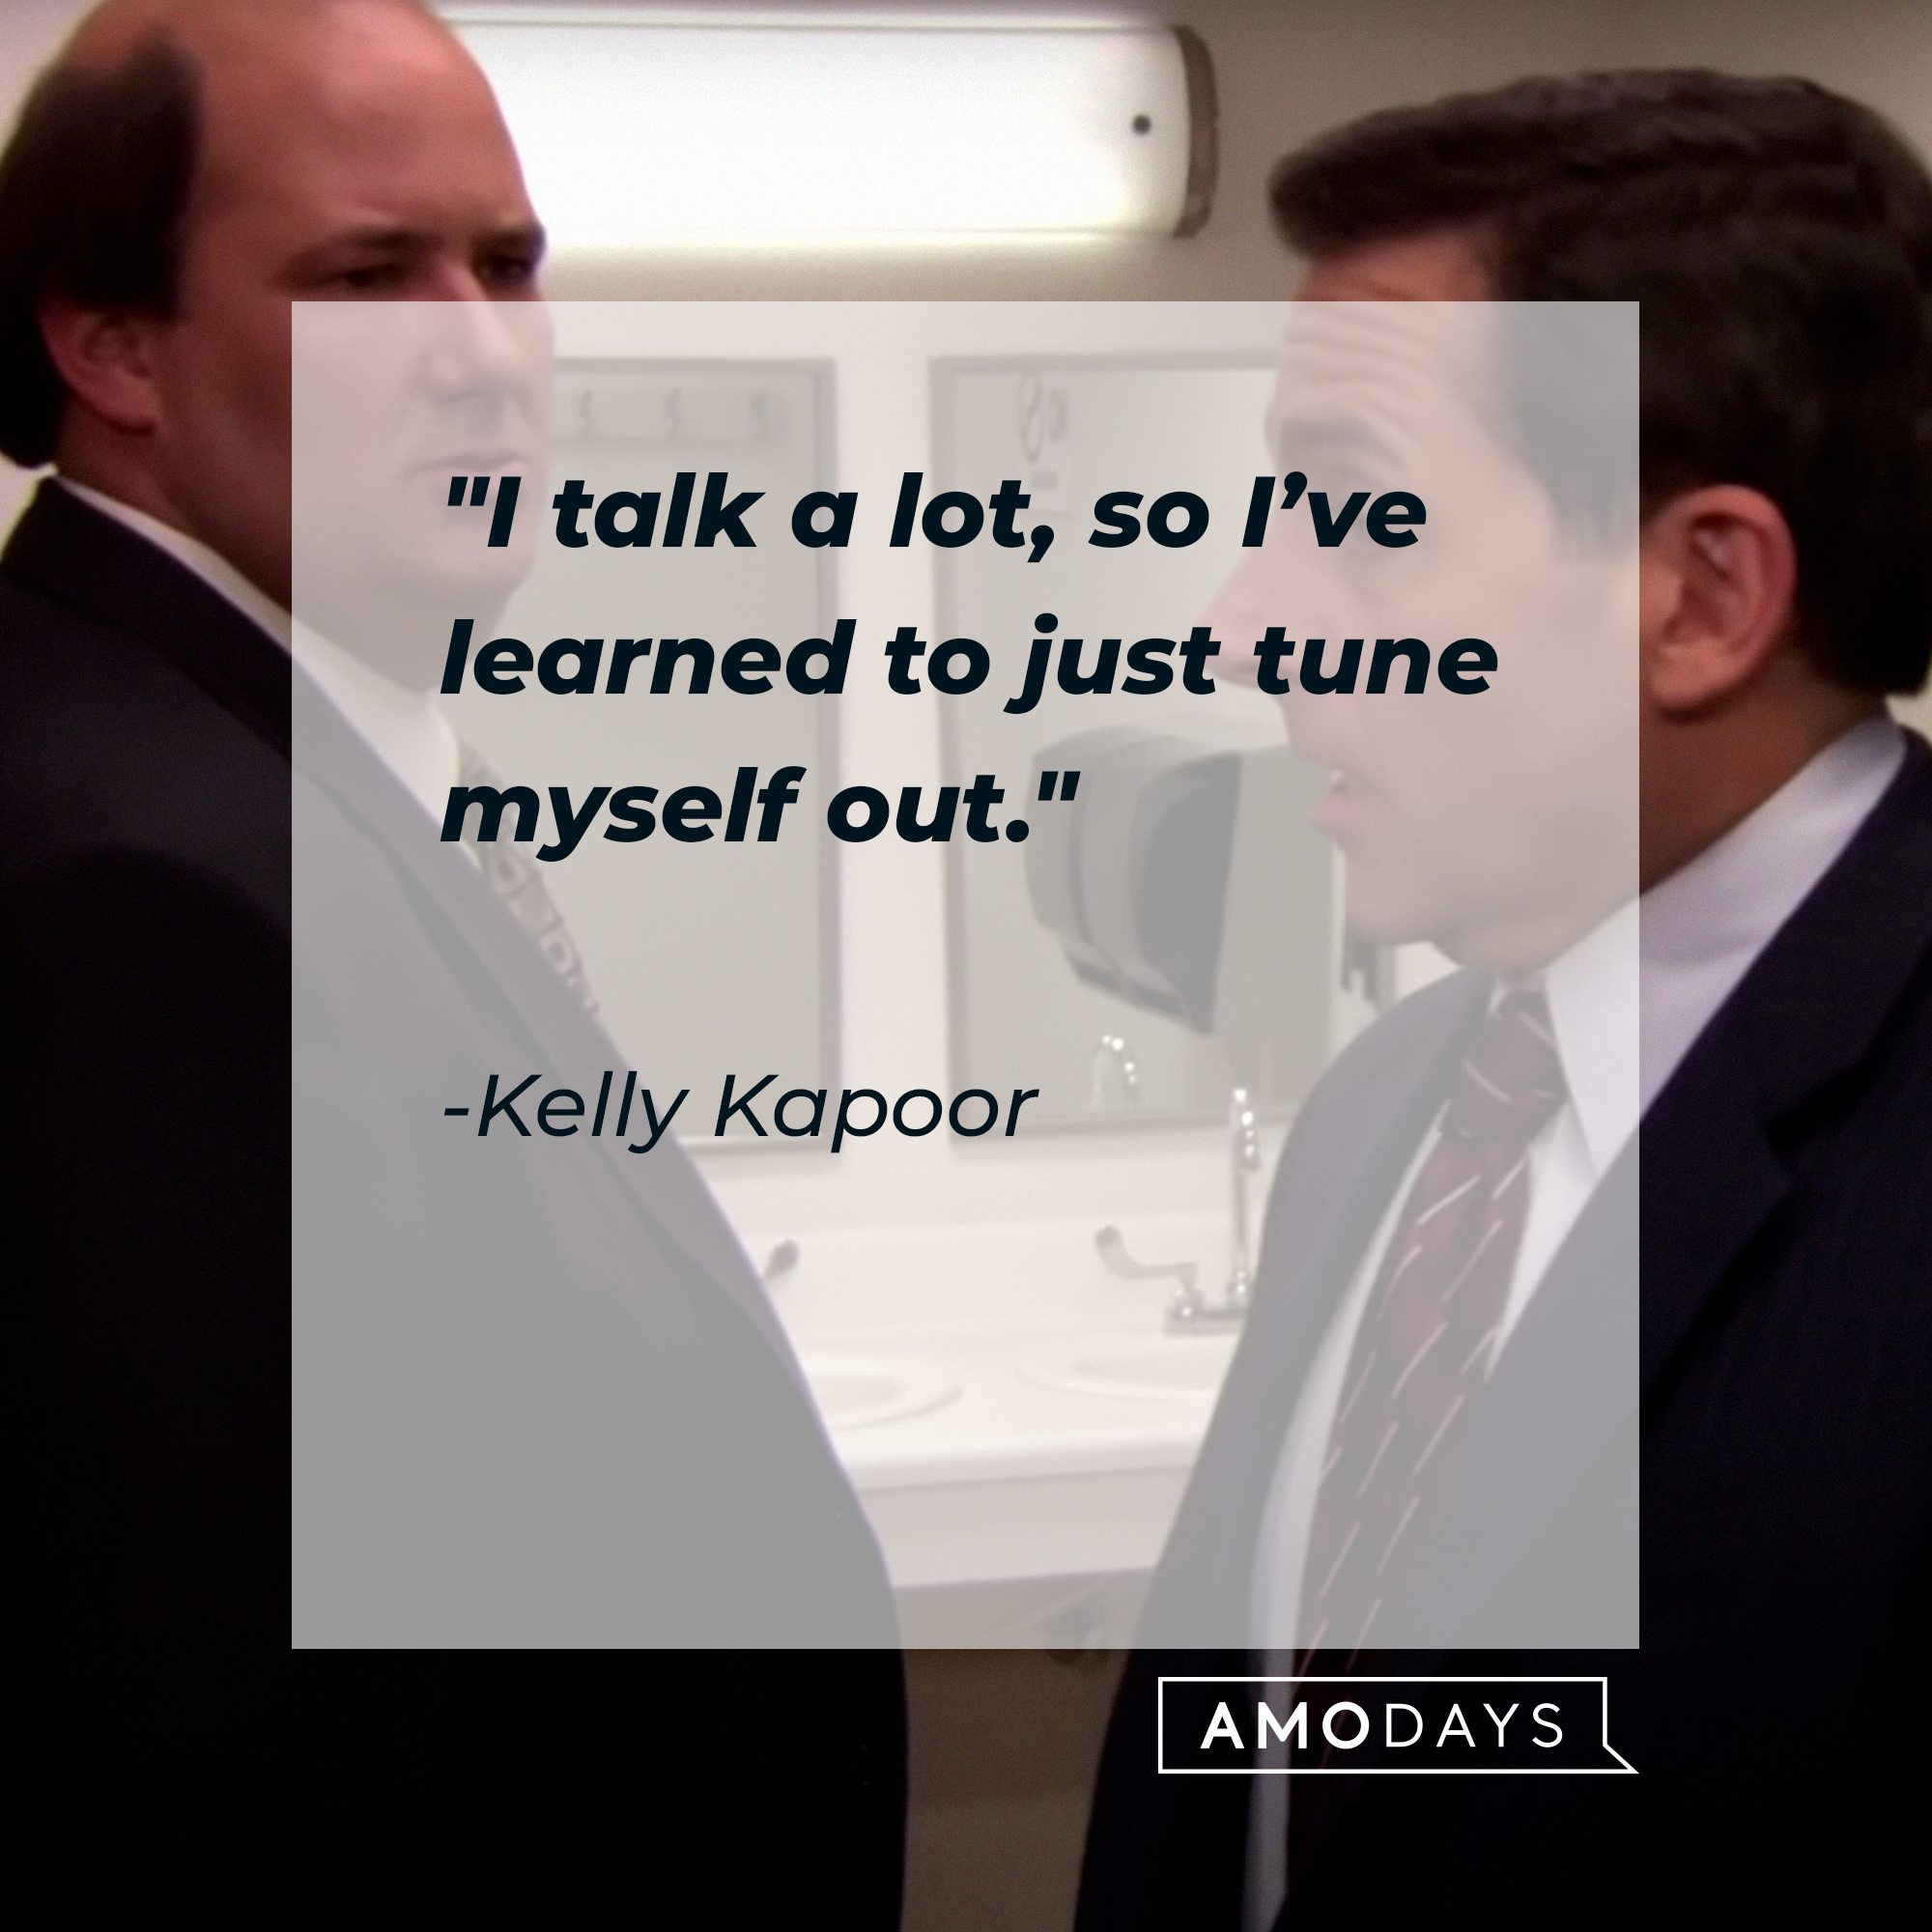 Kelly Kapoor's quote: "I talk a lot, so I've learned to just tune myself out" | Source: Youtube.com/TheOffice